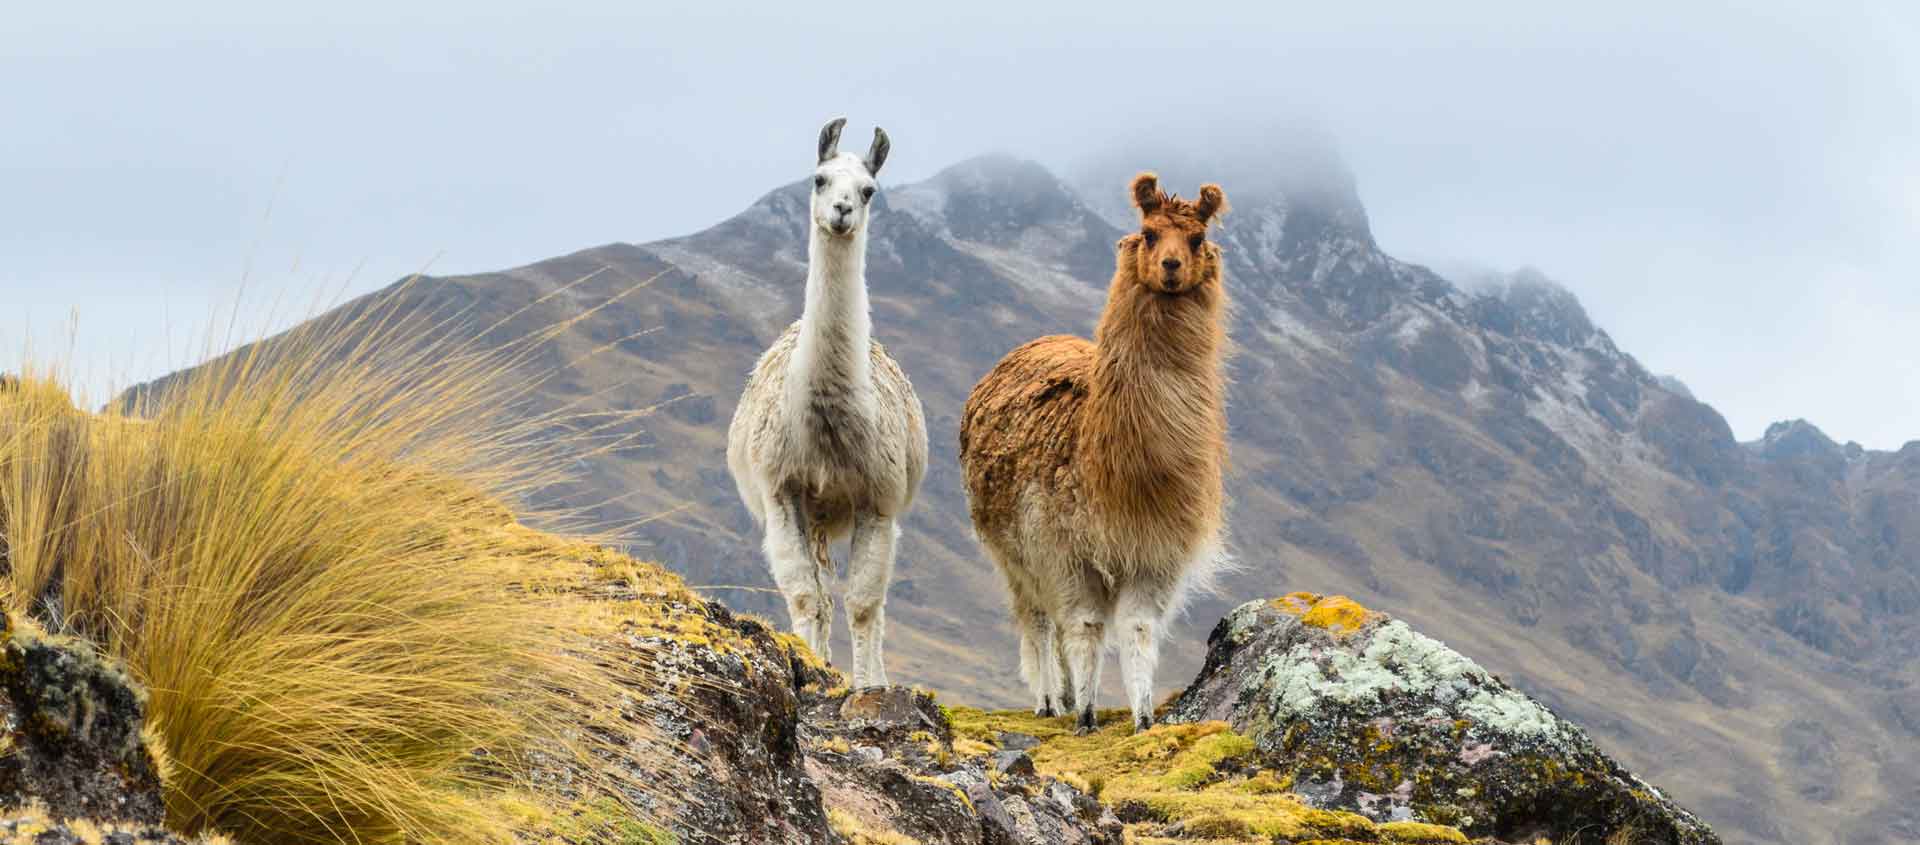 Costa Rica to Chile image depicting two llamas